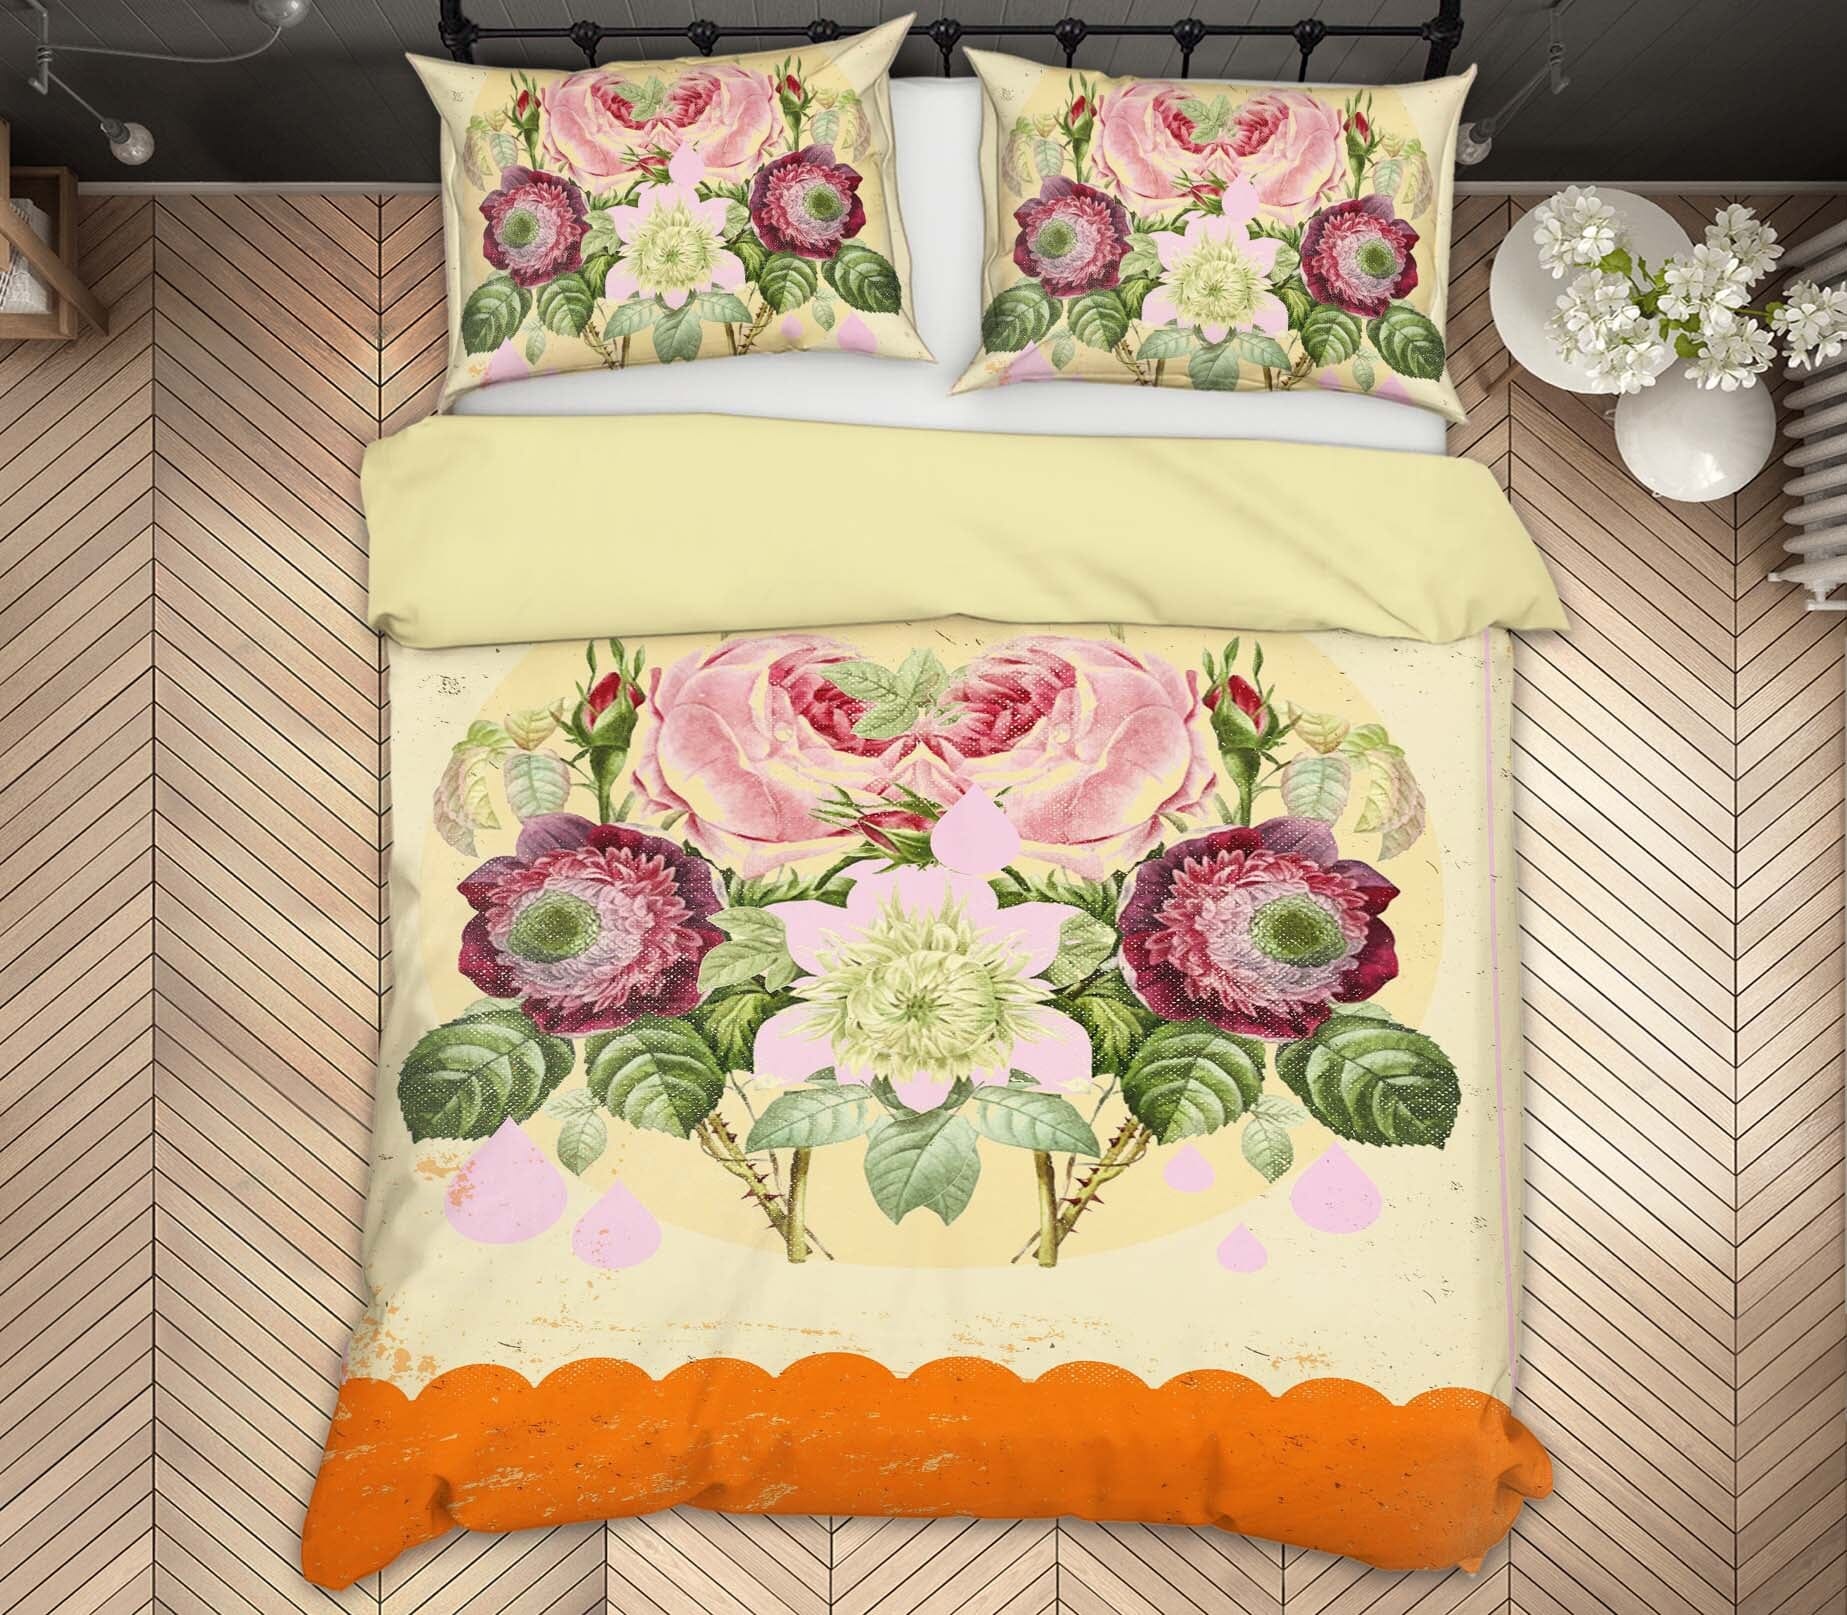 3D Flower Cluster 2111 Showdeer Bedding Bed Pillowcases Quilt Quiet Covers AJ Creativity Home 